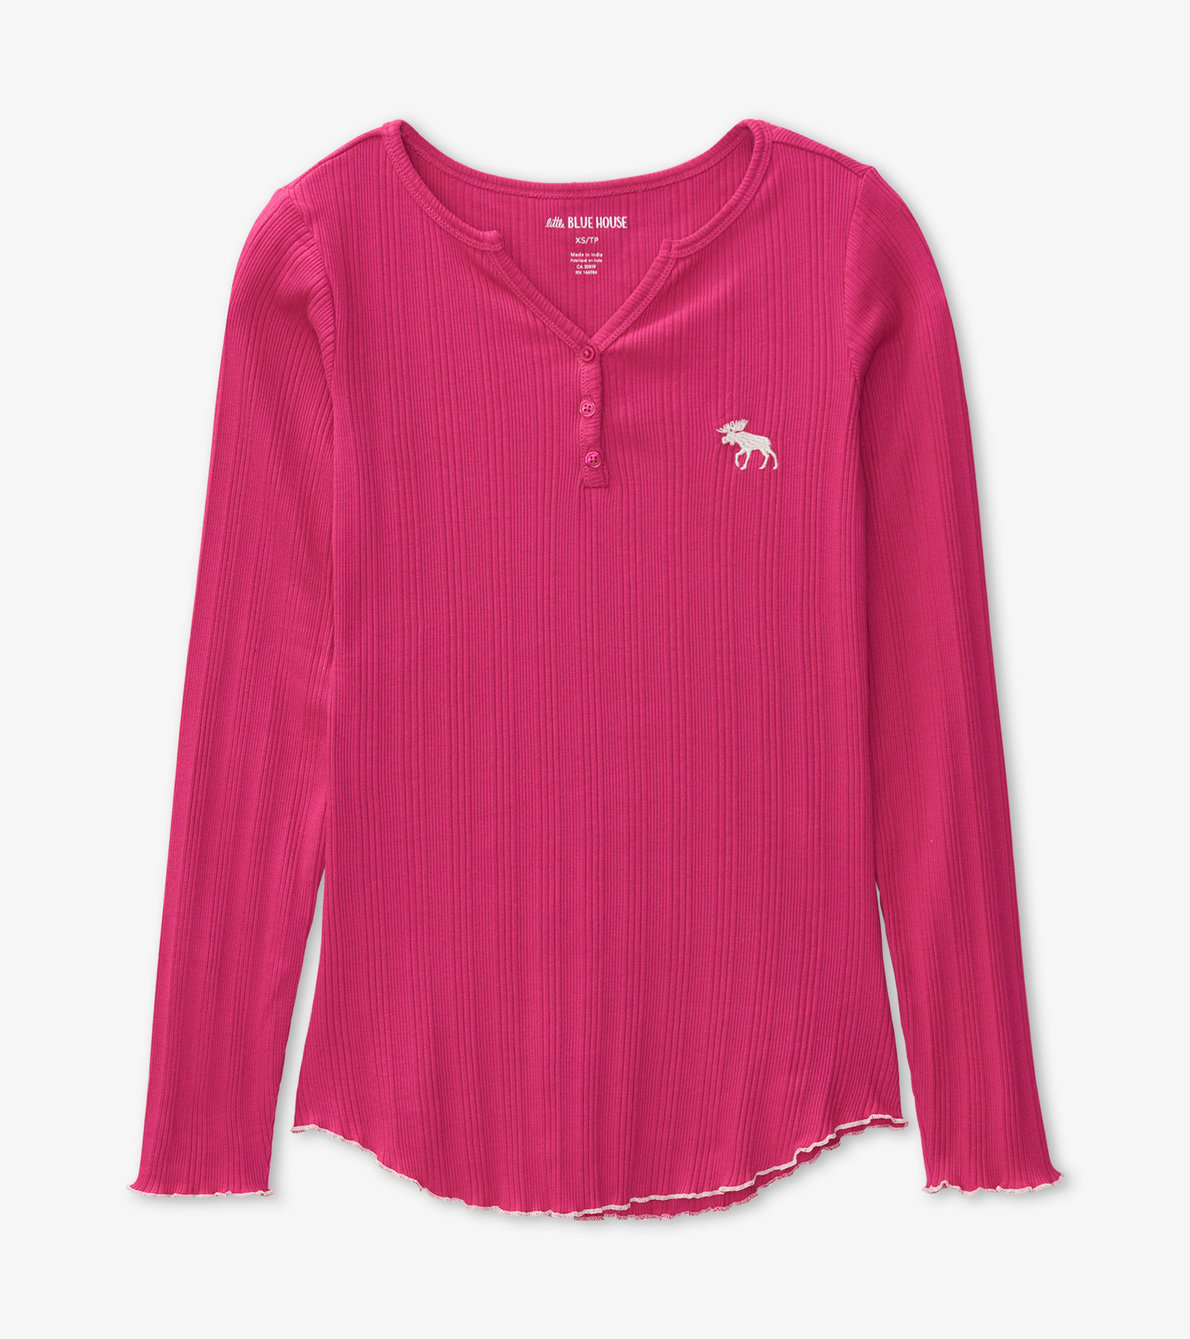 View larger image of Moose Women's Rib Long Sleeve Henley